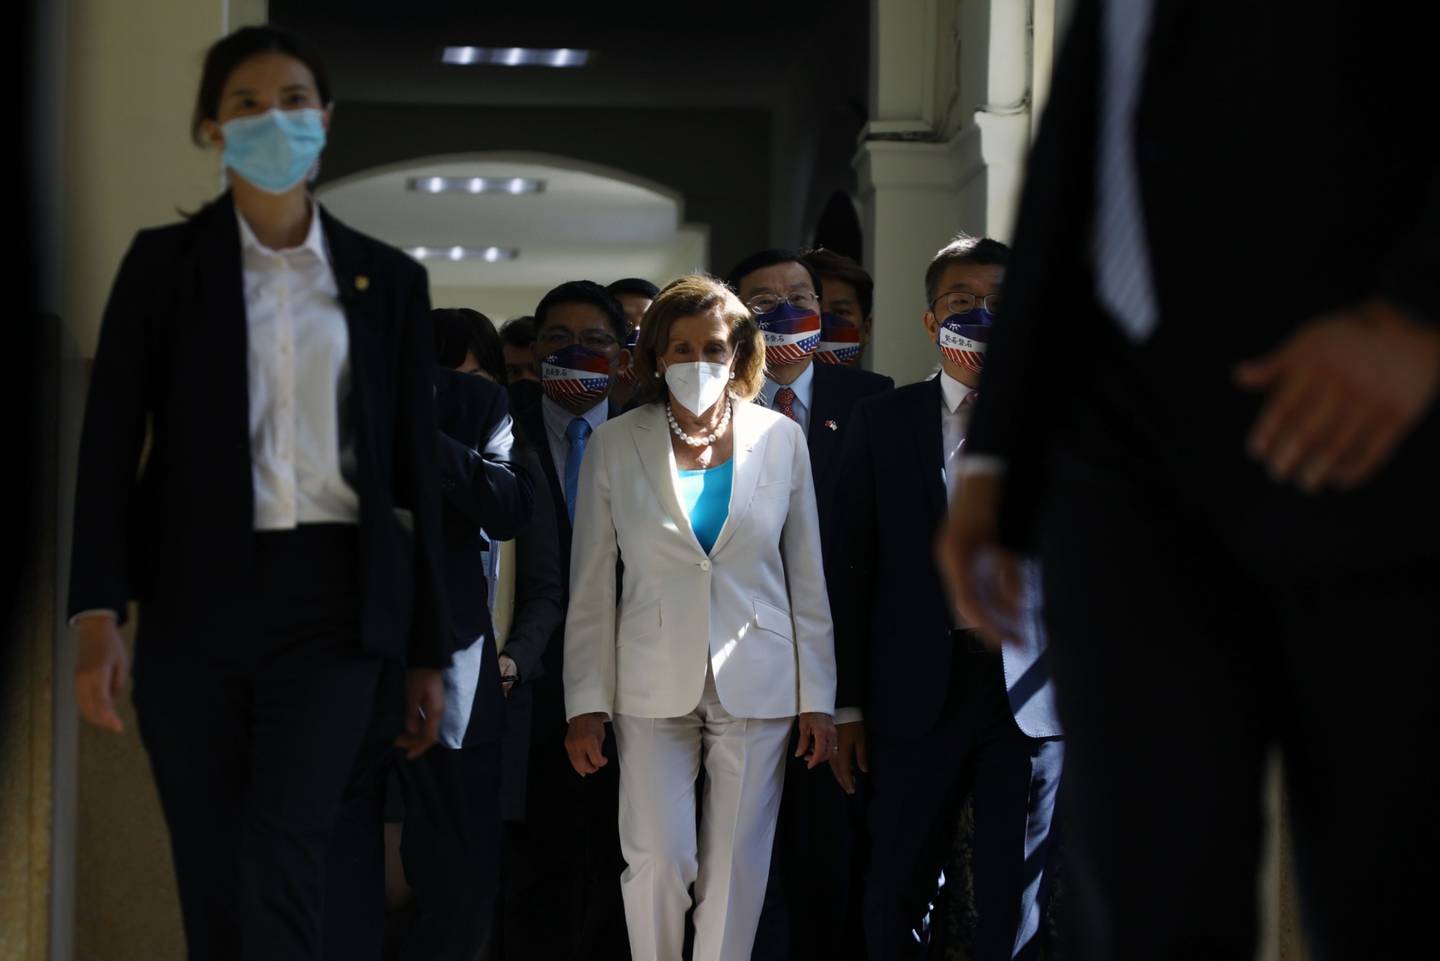 US House Speaker Nancy Pelosi, center, arrives at the Legislative Yuan in Taipei, Taiwan, on Wednesday, Aug. 3, 2022. Pelosi became the highest-ranking American politician to visit Taiwan in 25 years, prompting China to announce missile tests and military drills encircling the island that set the stage for some of its most provocative actions in decades.dfd